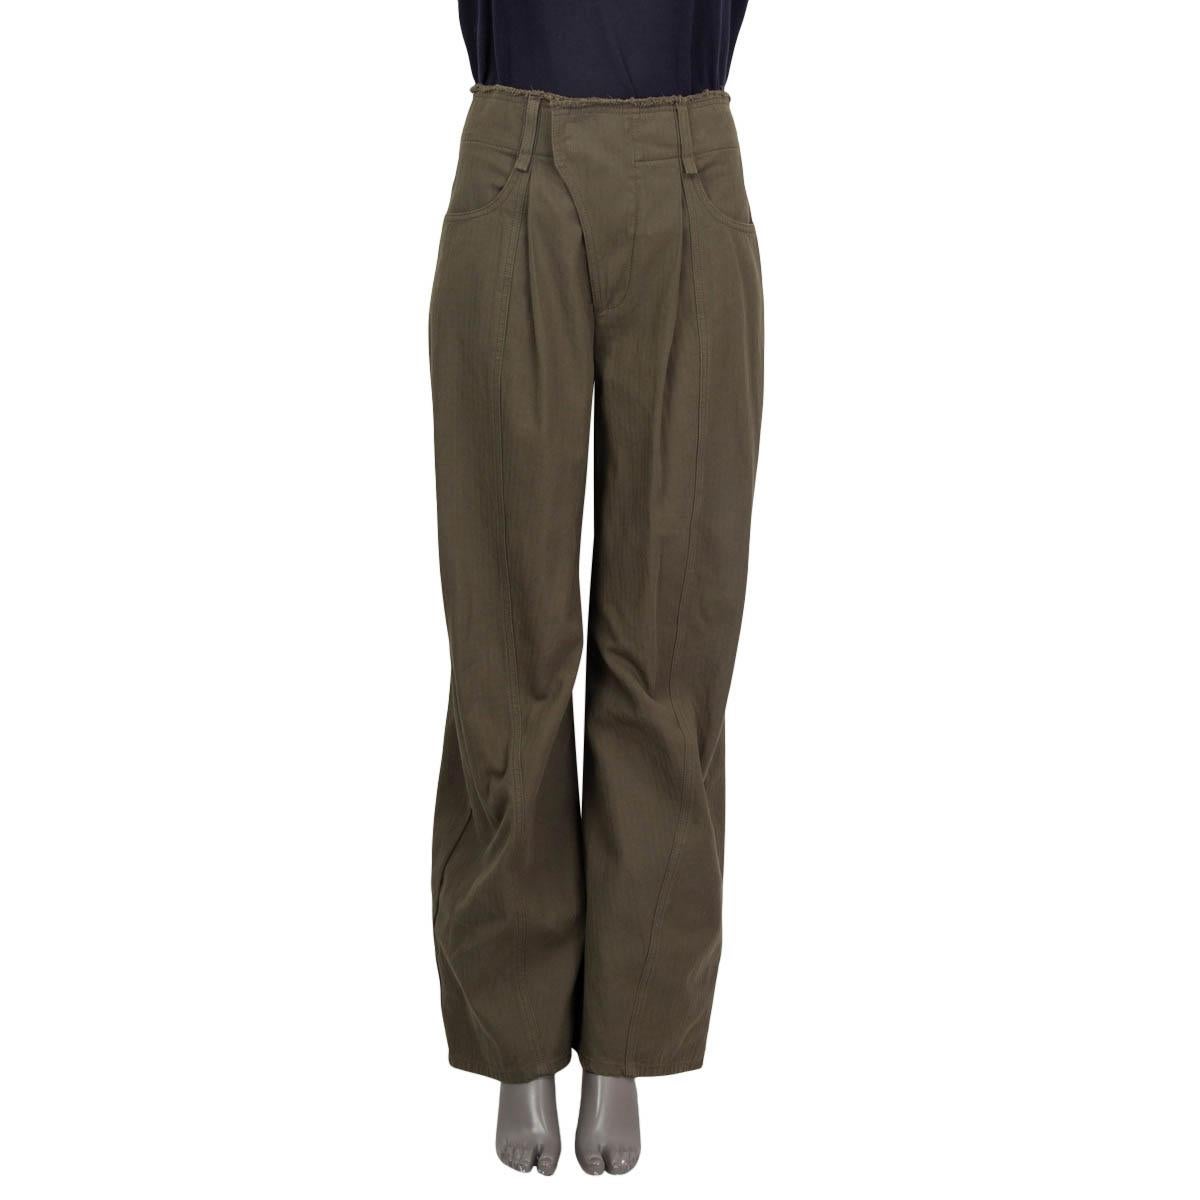 100% authentic Chloè frayed herringbone wide leg pants in grape leaf cotton (100%). Features a fringed hemline, belt loops, two slit pockets on the front and two slit pockets on the back. Opens with hook, button and zipper on the front. Lined in